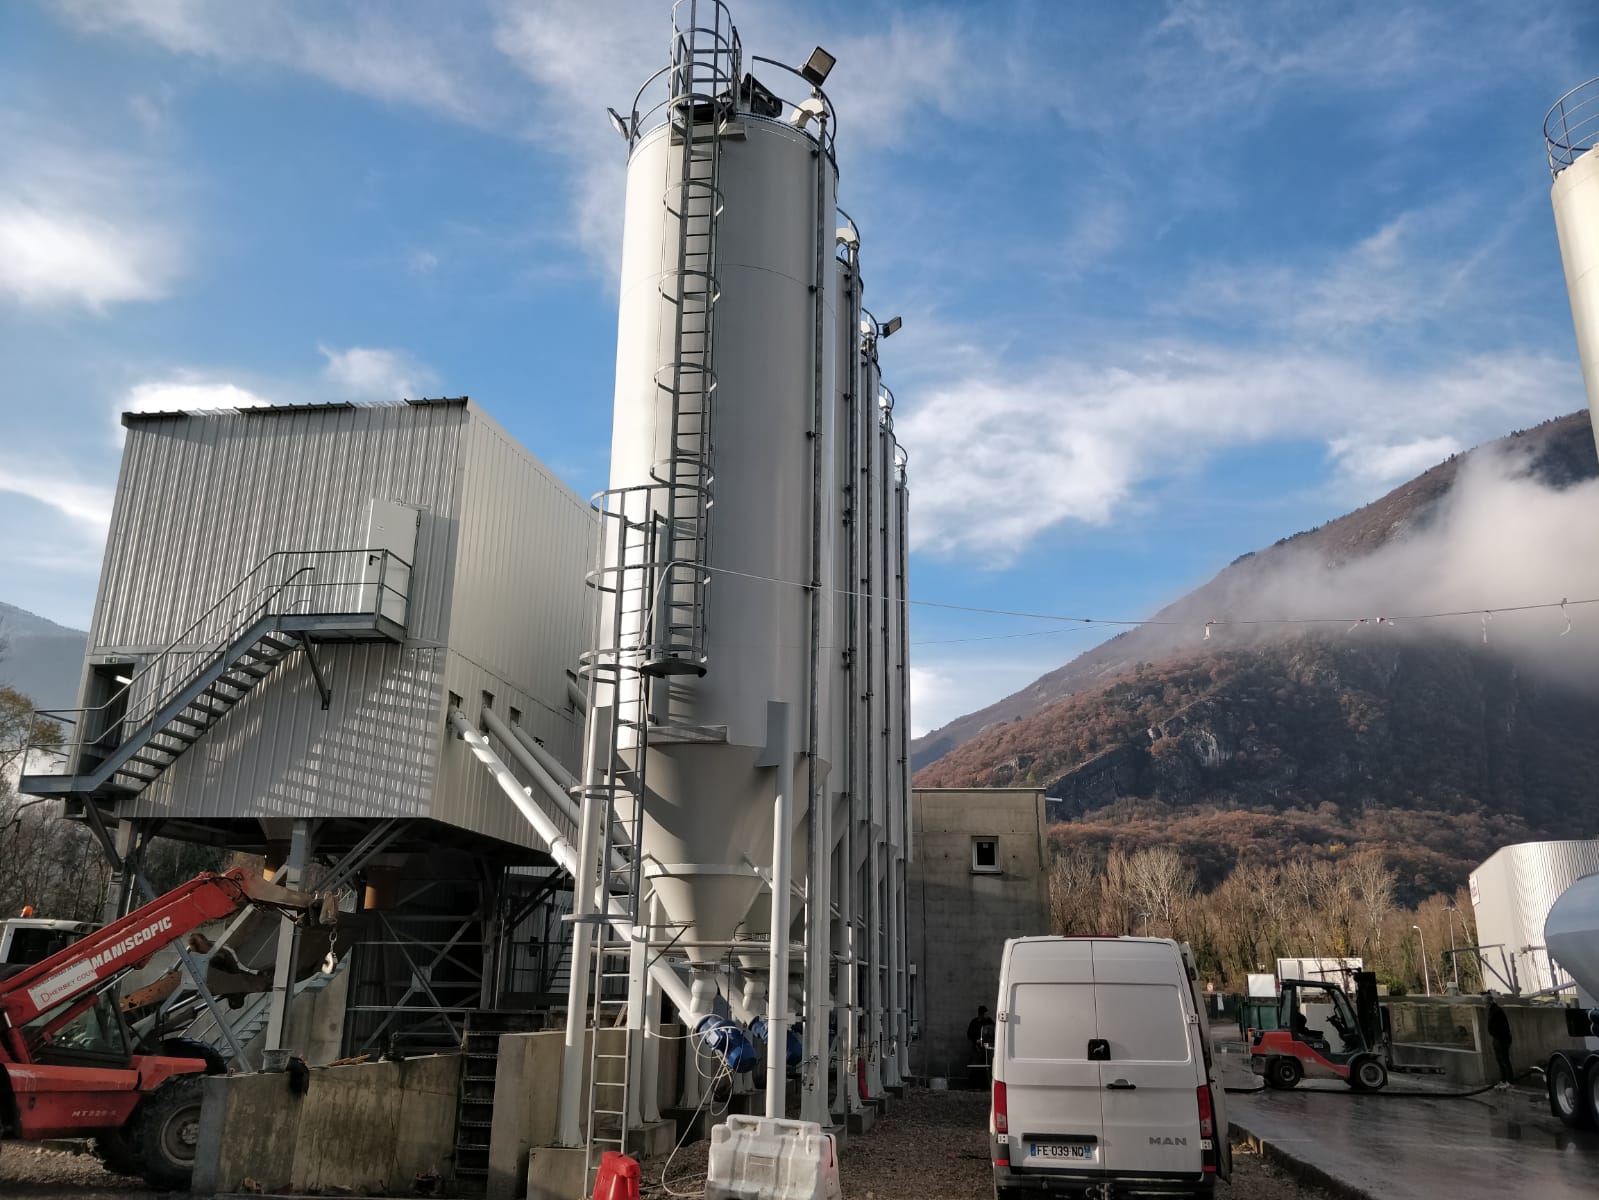 CENTRALE BPE BML ISERE 2020